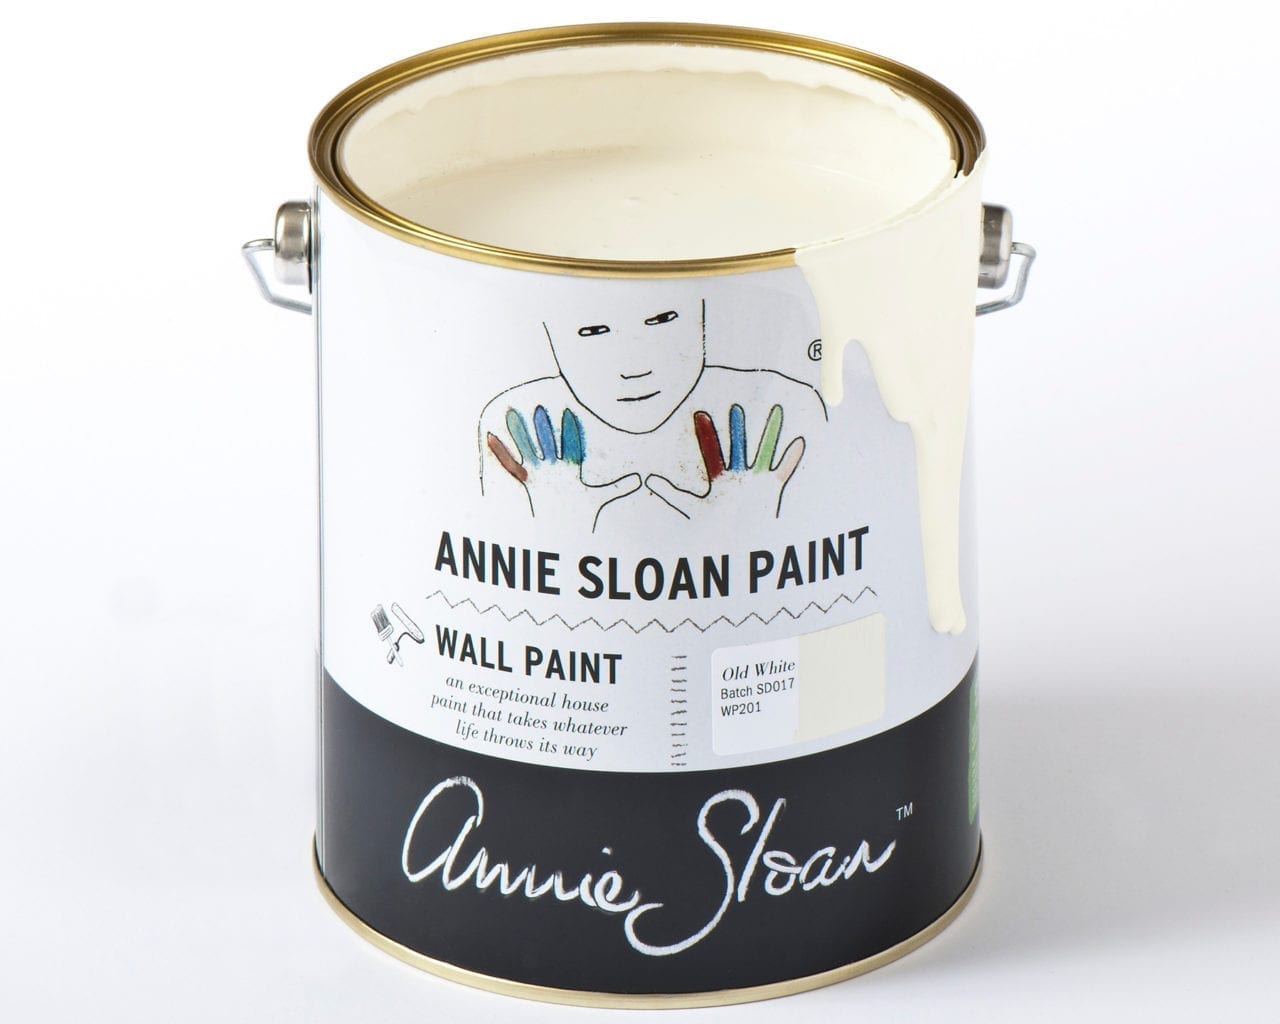 2.5 litre tin of Wall Paint by Annie Sloan in Old White, a cool soft off-white